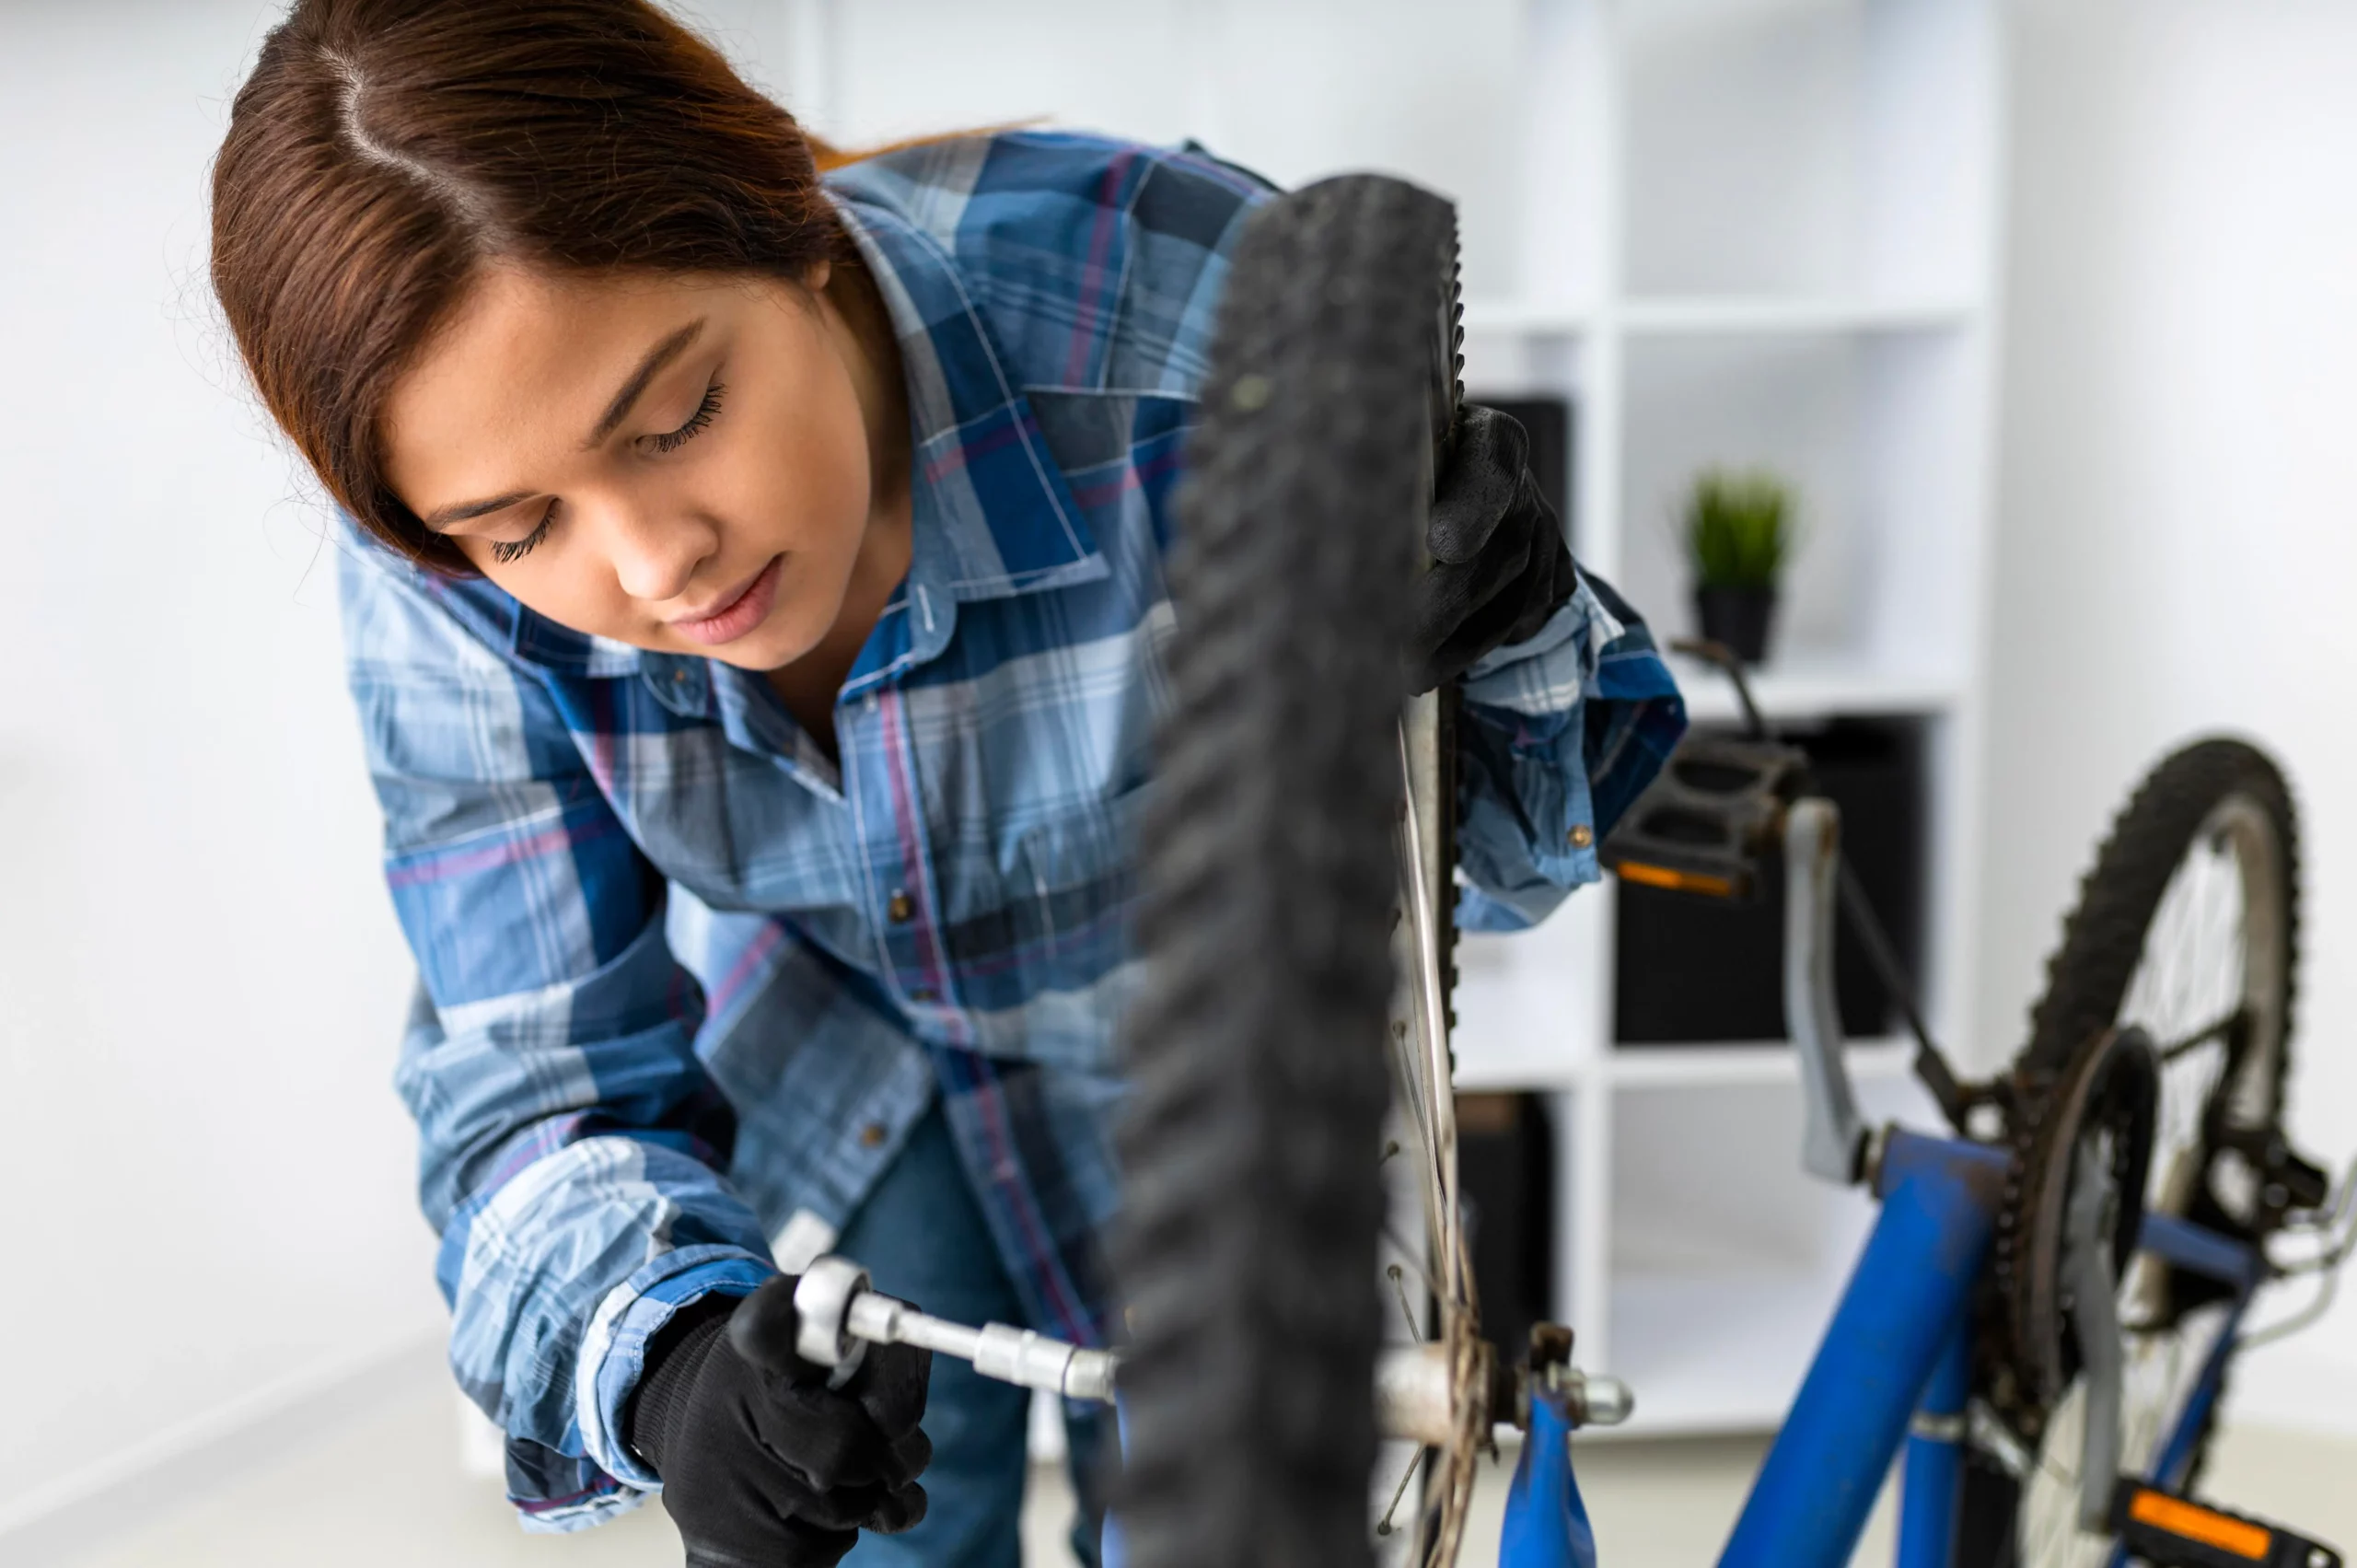 Women's E-bike Frequently Asked Questions